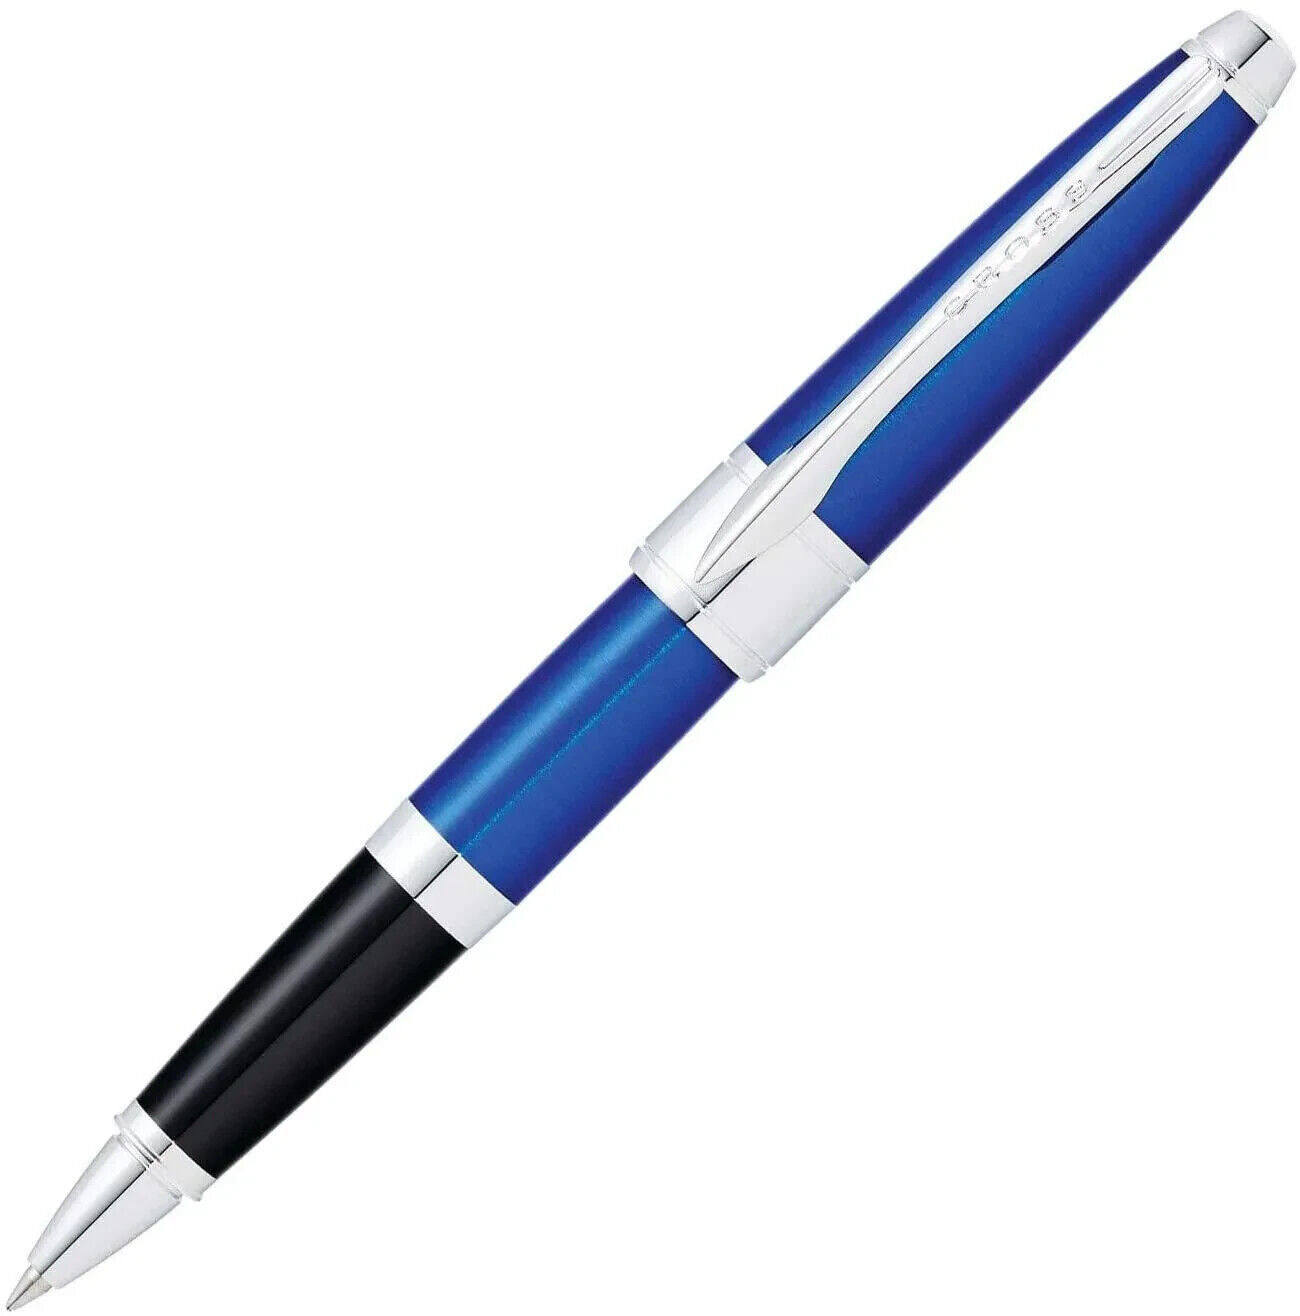 Cross Apogee Limited Release Rollerball Pen, Blue Lacquer, New In Cross Gift Box